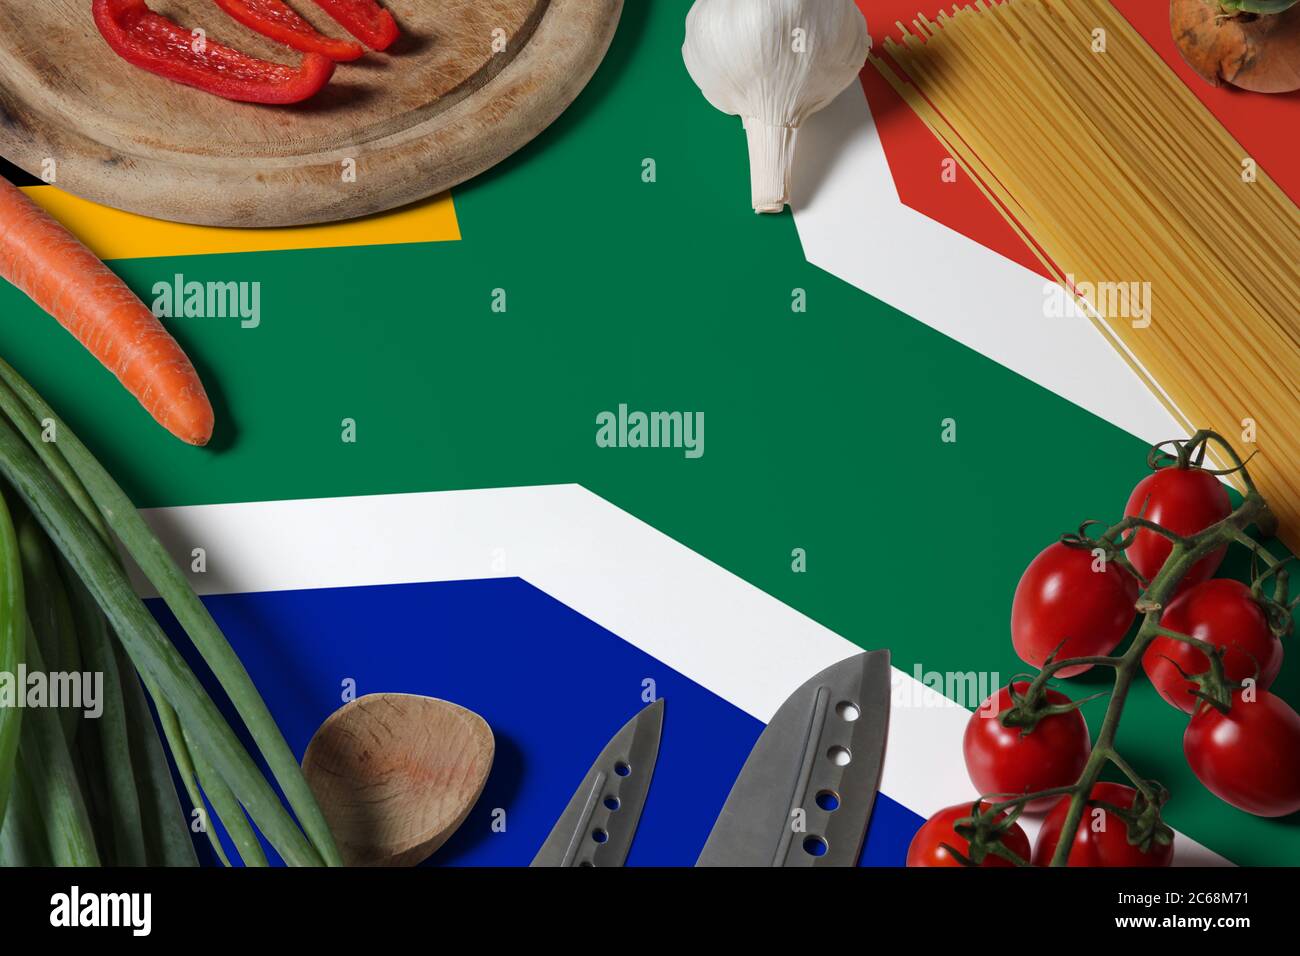 South Africa flag on fresh vegetables and knife concept wooden table. Cooking concept with preparing background theme. Stock Photo